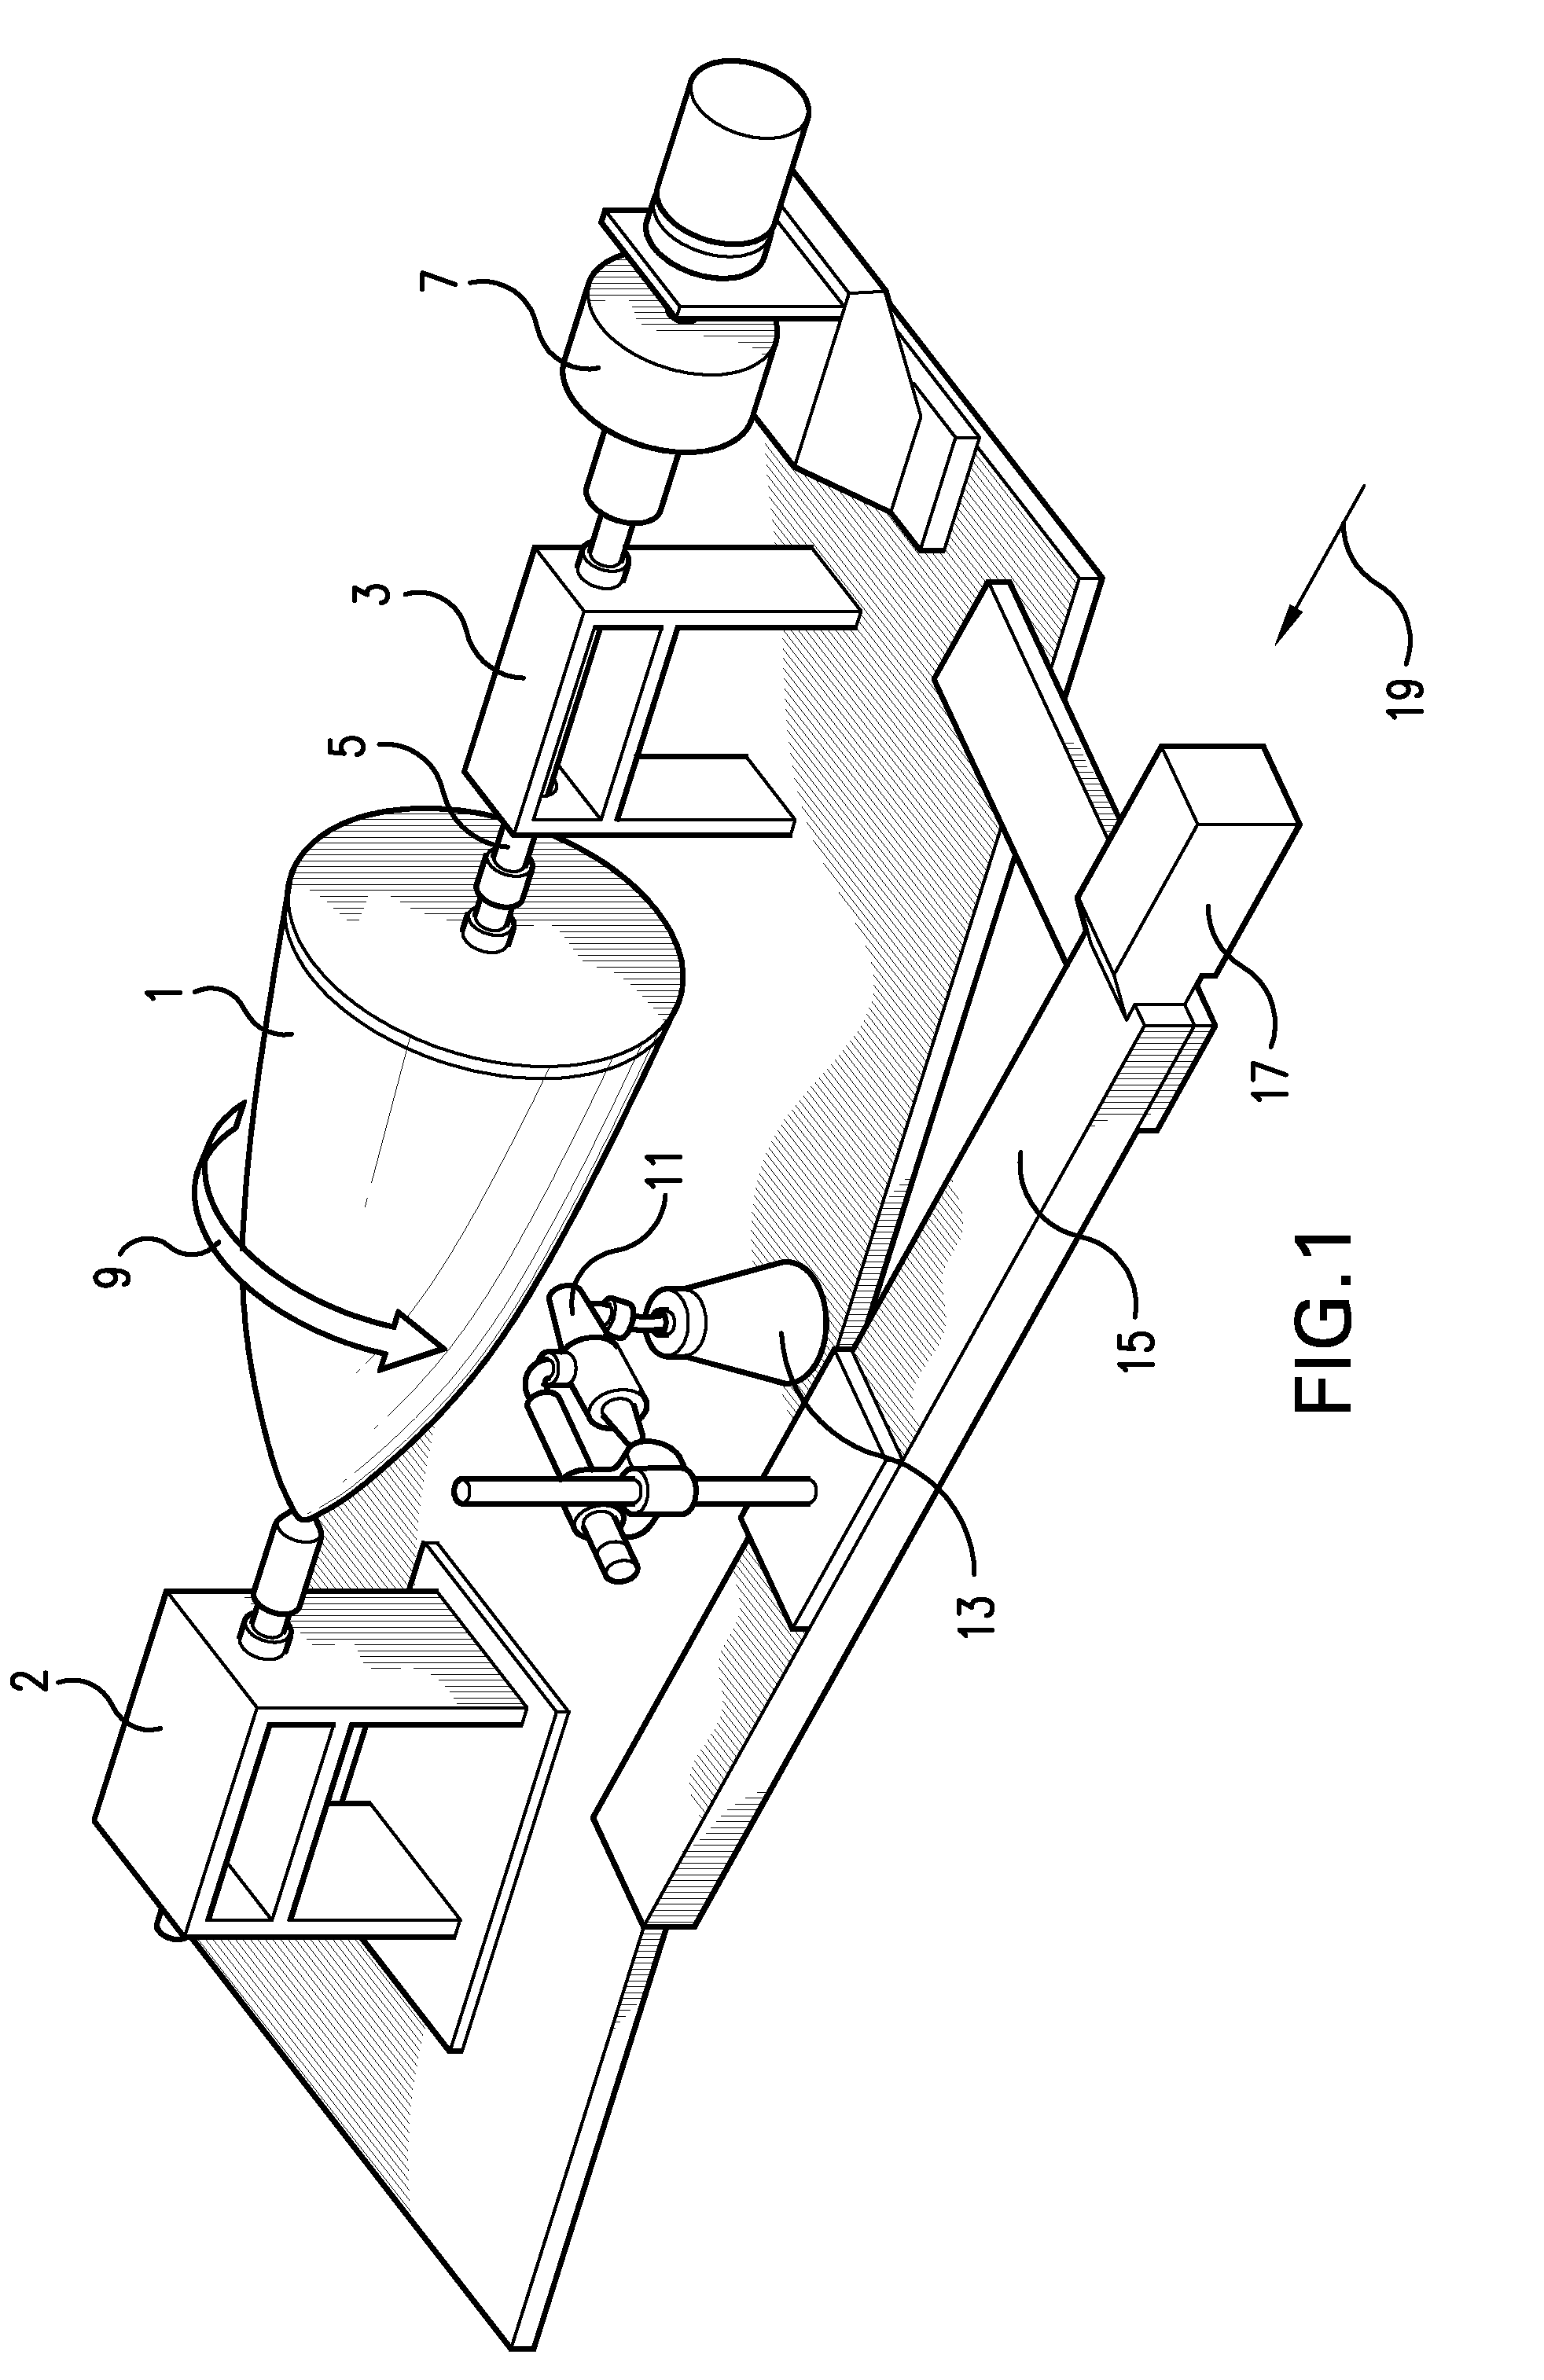 Method and apparatus for applying electronic circuits to curved surfaces